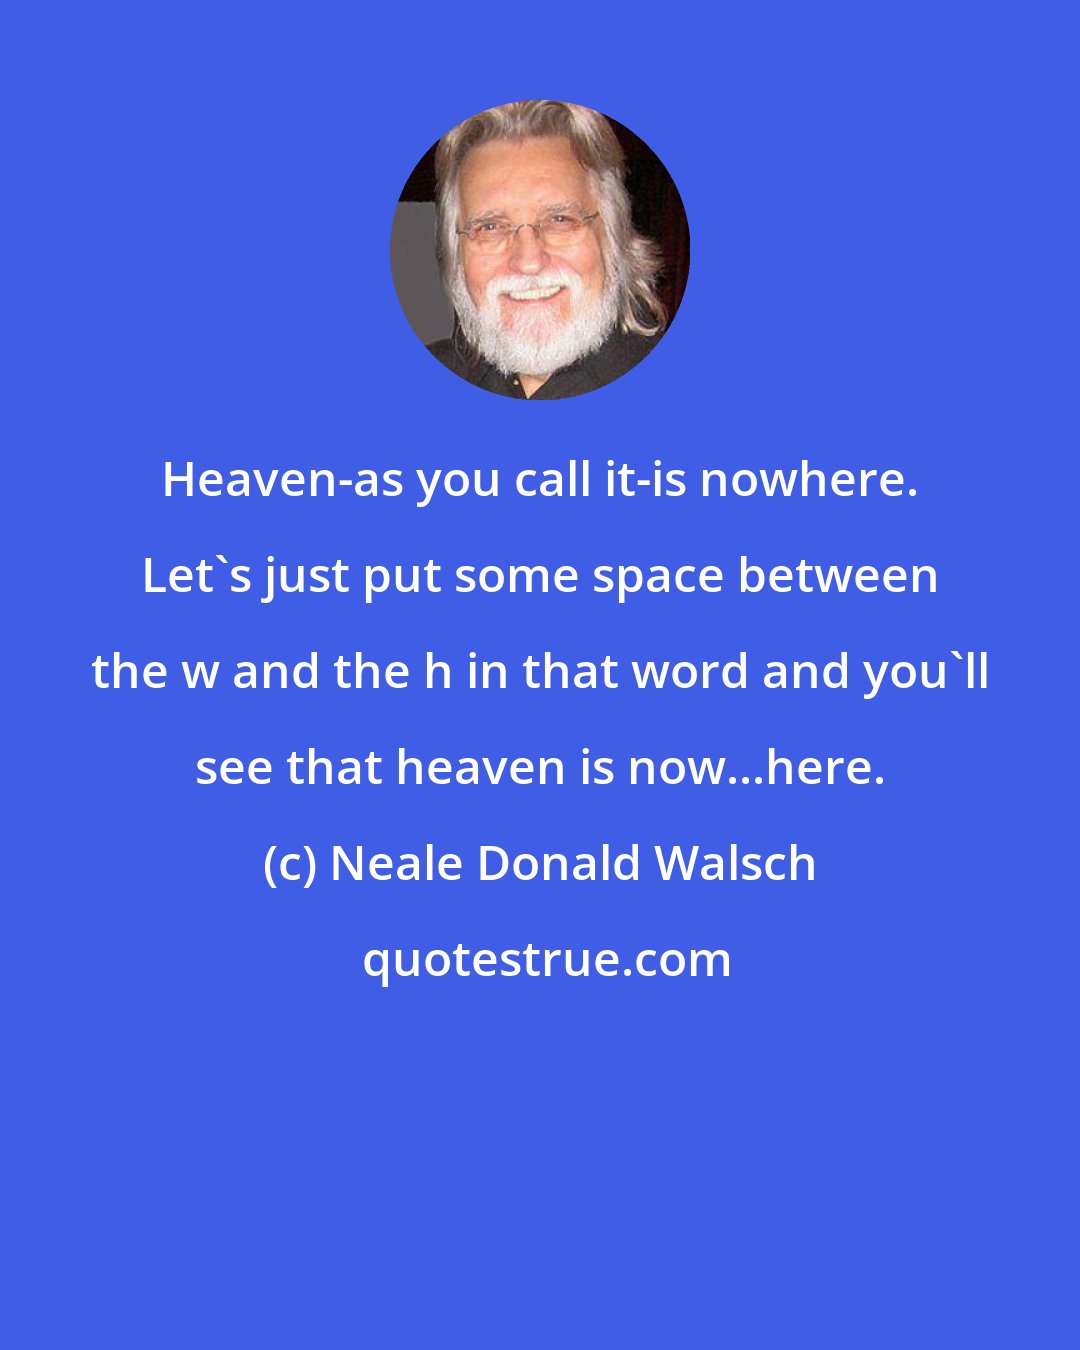 Neale Donald Walsch: Heaven-as you call it-is nowhere. Let's just put some space between the w and the h in that word and you'll see that heaven is now...here.